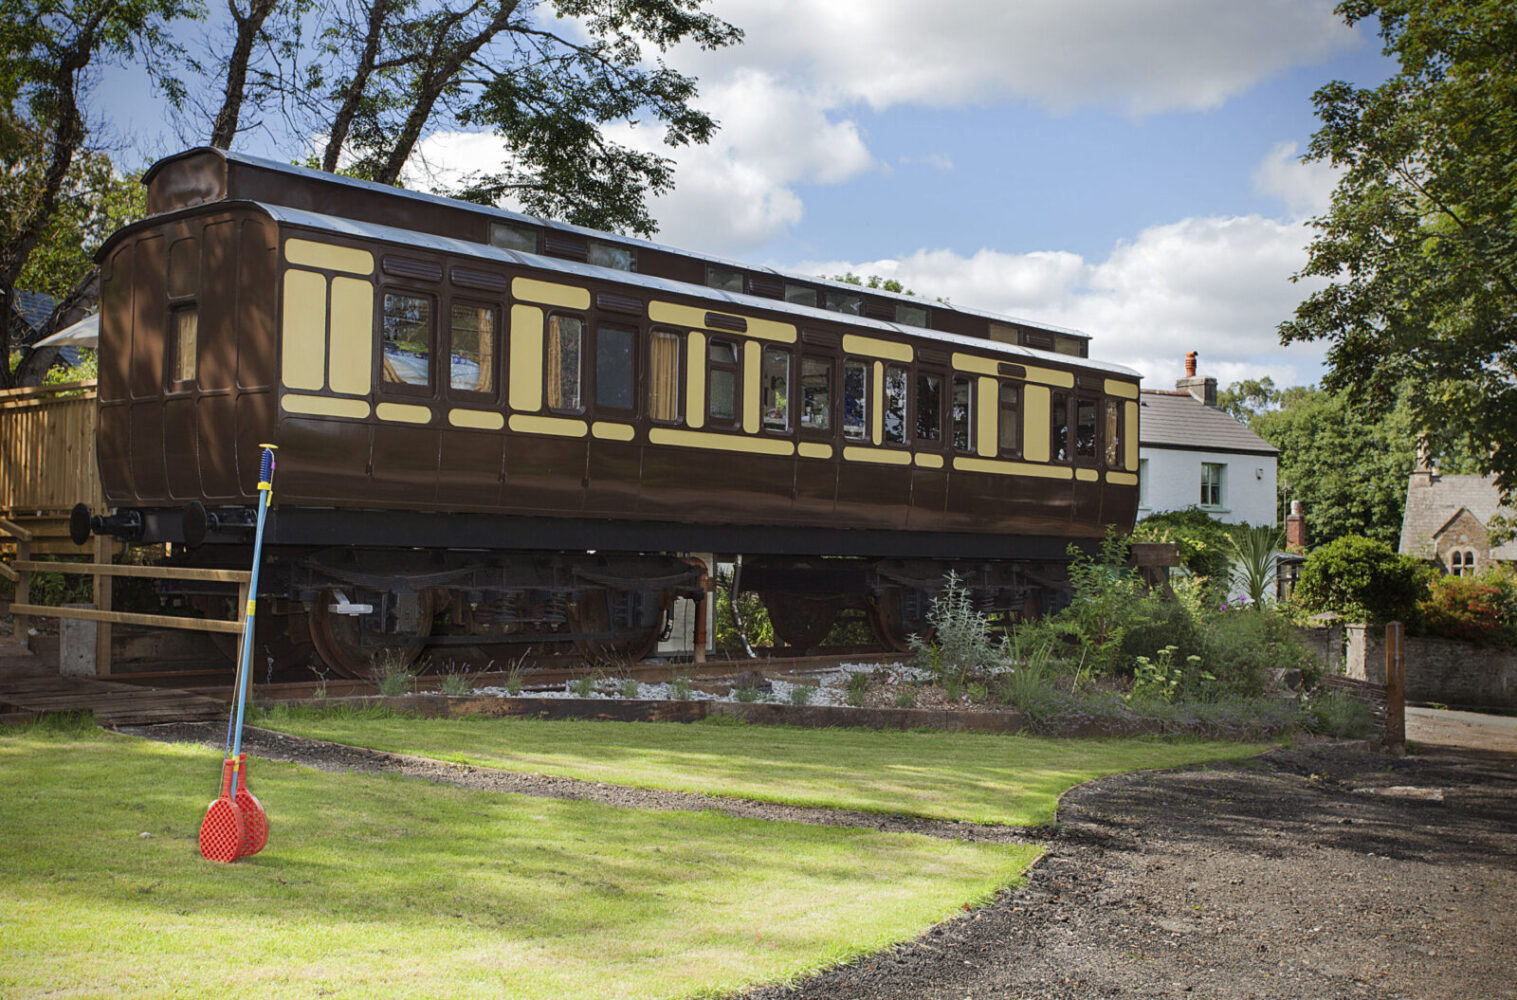 Mevy is a beautifully converted Victorian railway carriage